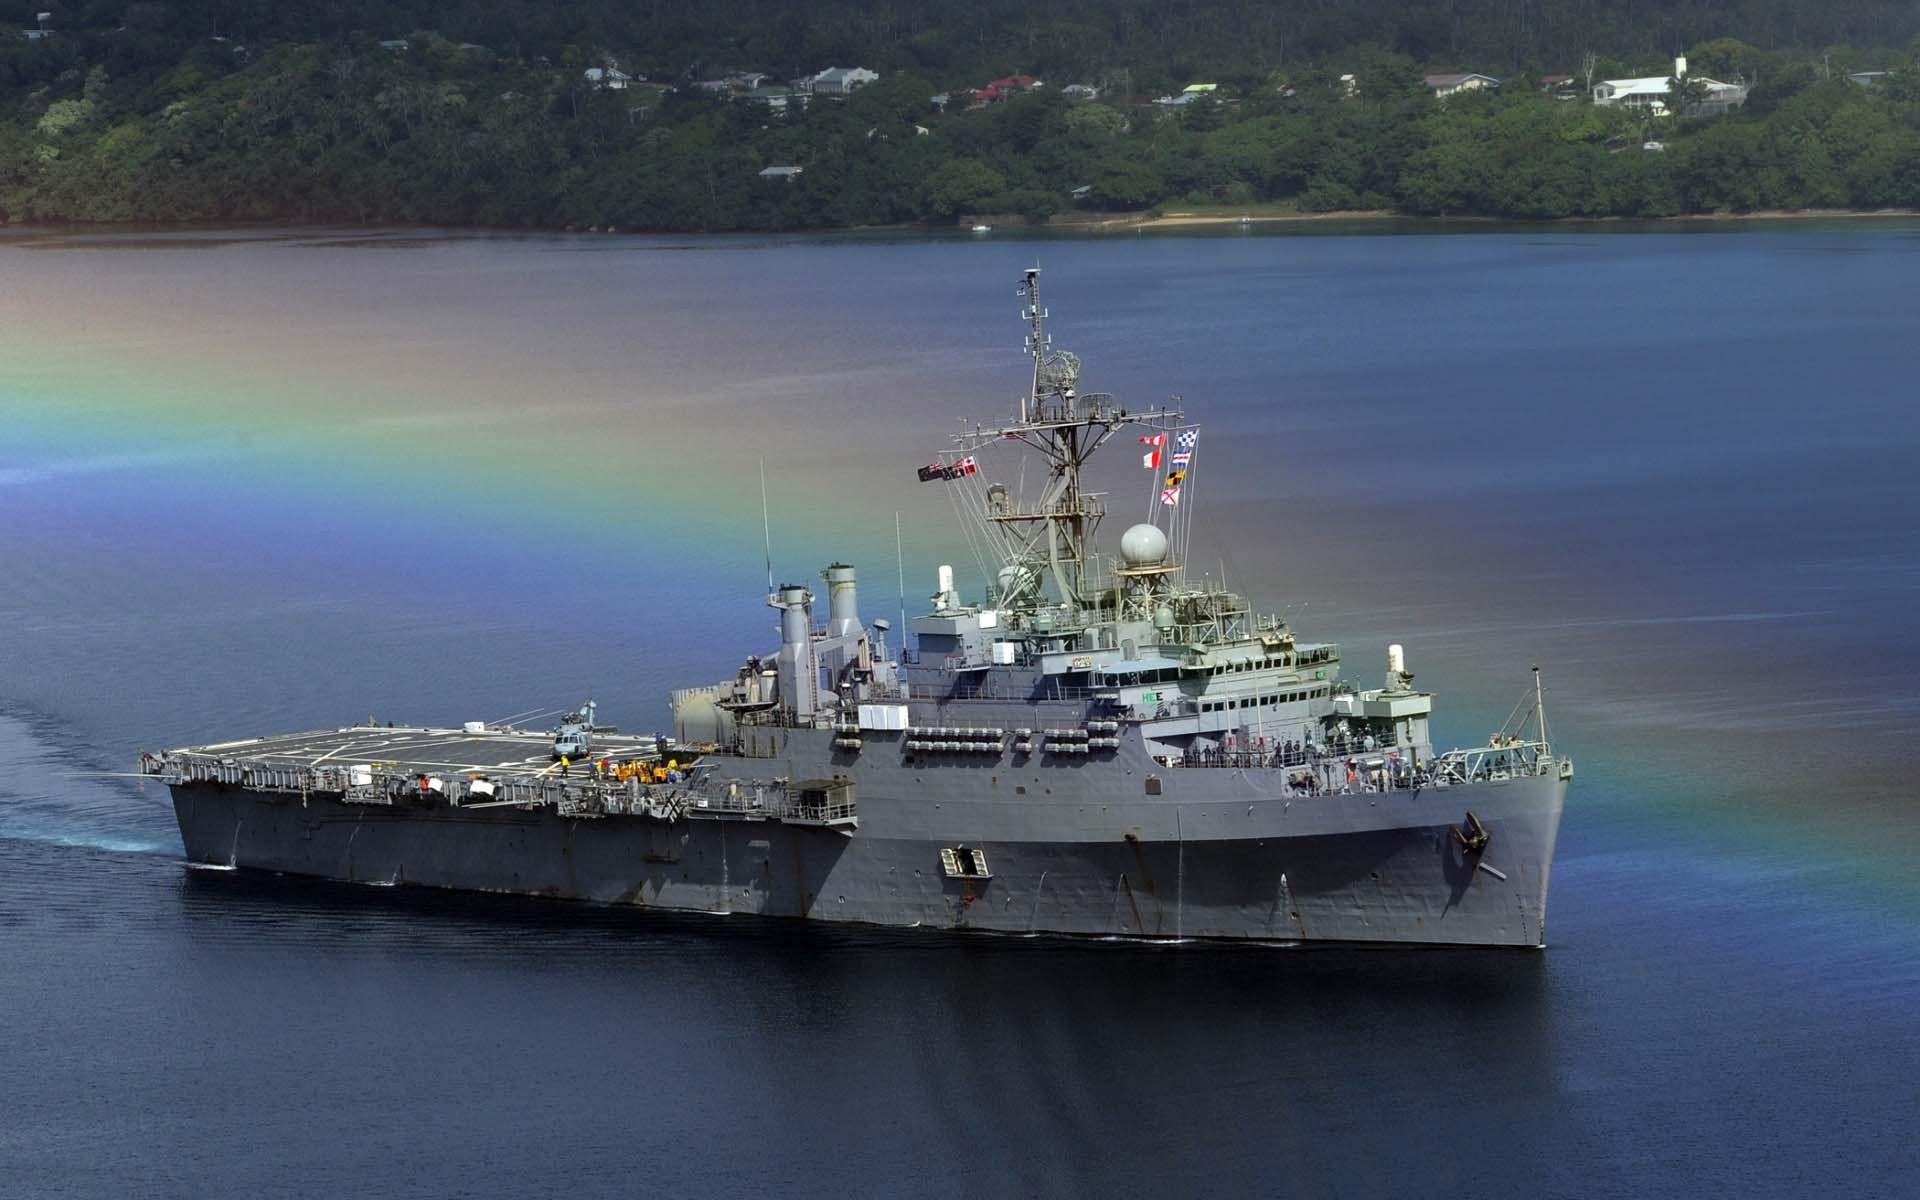 Wallpapers navy ship combat, the rainbow, the sea. wallpapers